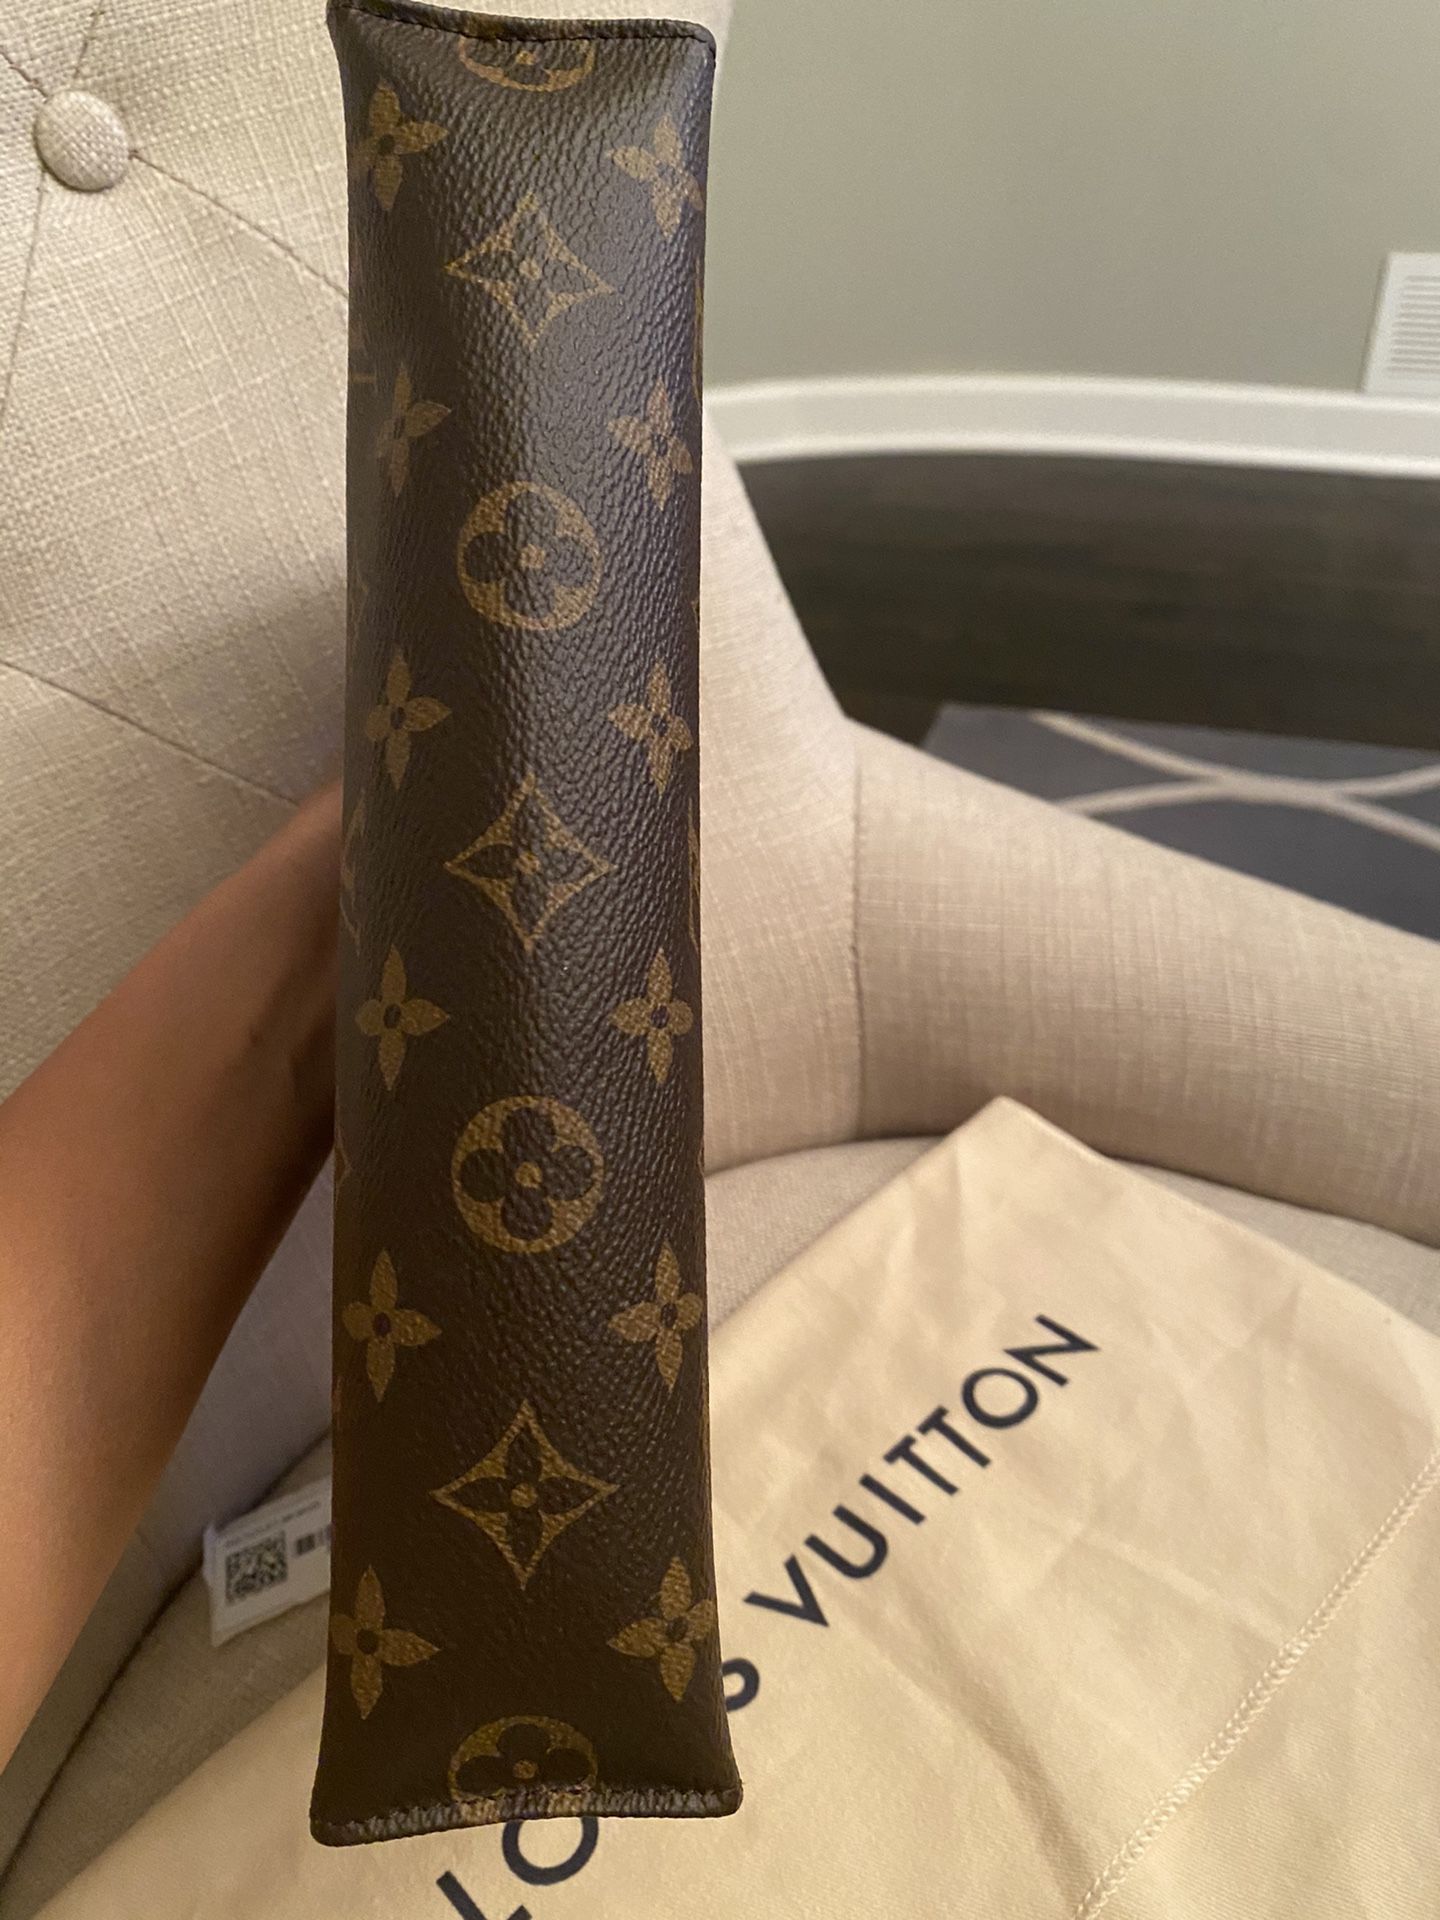 Louis Vuitton make up bags both in mint condition like new!!date codes  AR5106 and AR1145 for Sale in Bellflower, CA - OfferUp